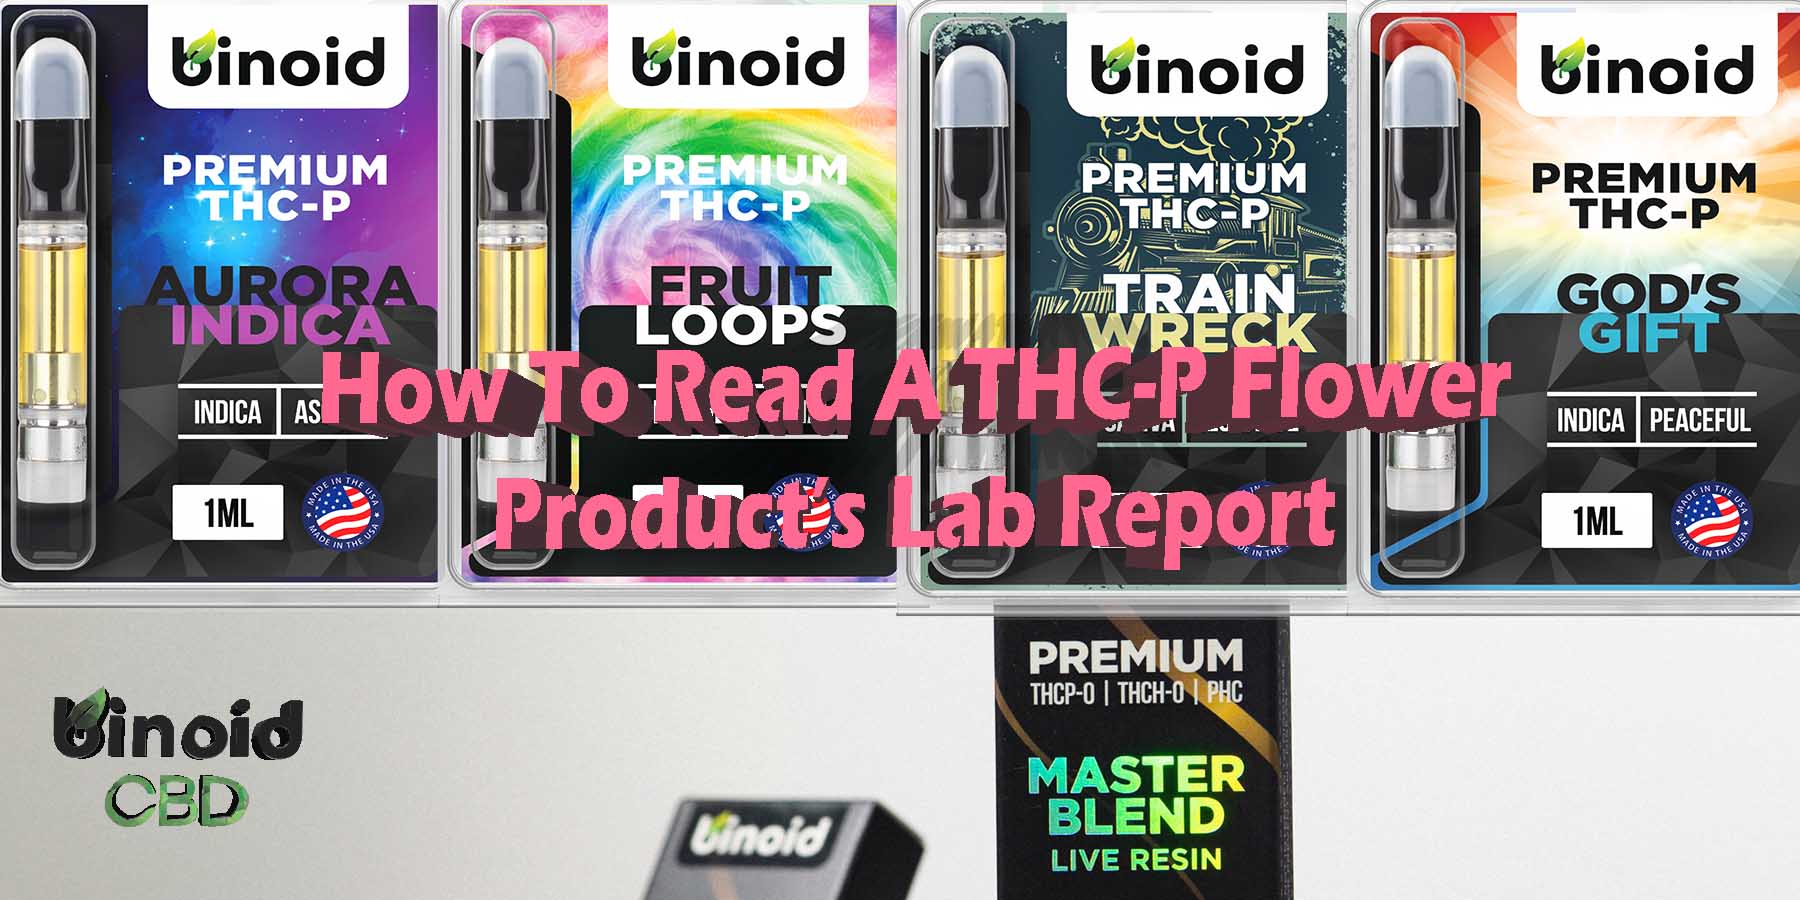 How To Read A THC-P Flower Products Lab Report Does THC-P Flower Get You High Guide Chart List How Much To Take Effects Strength Benefits Legality Drug Test Where To Buy THC-P